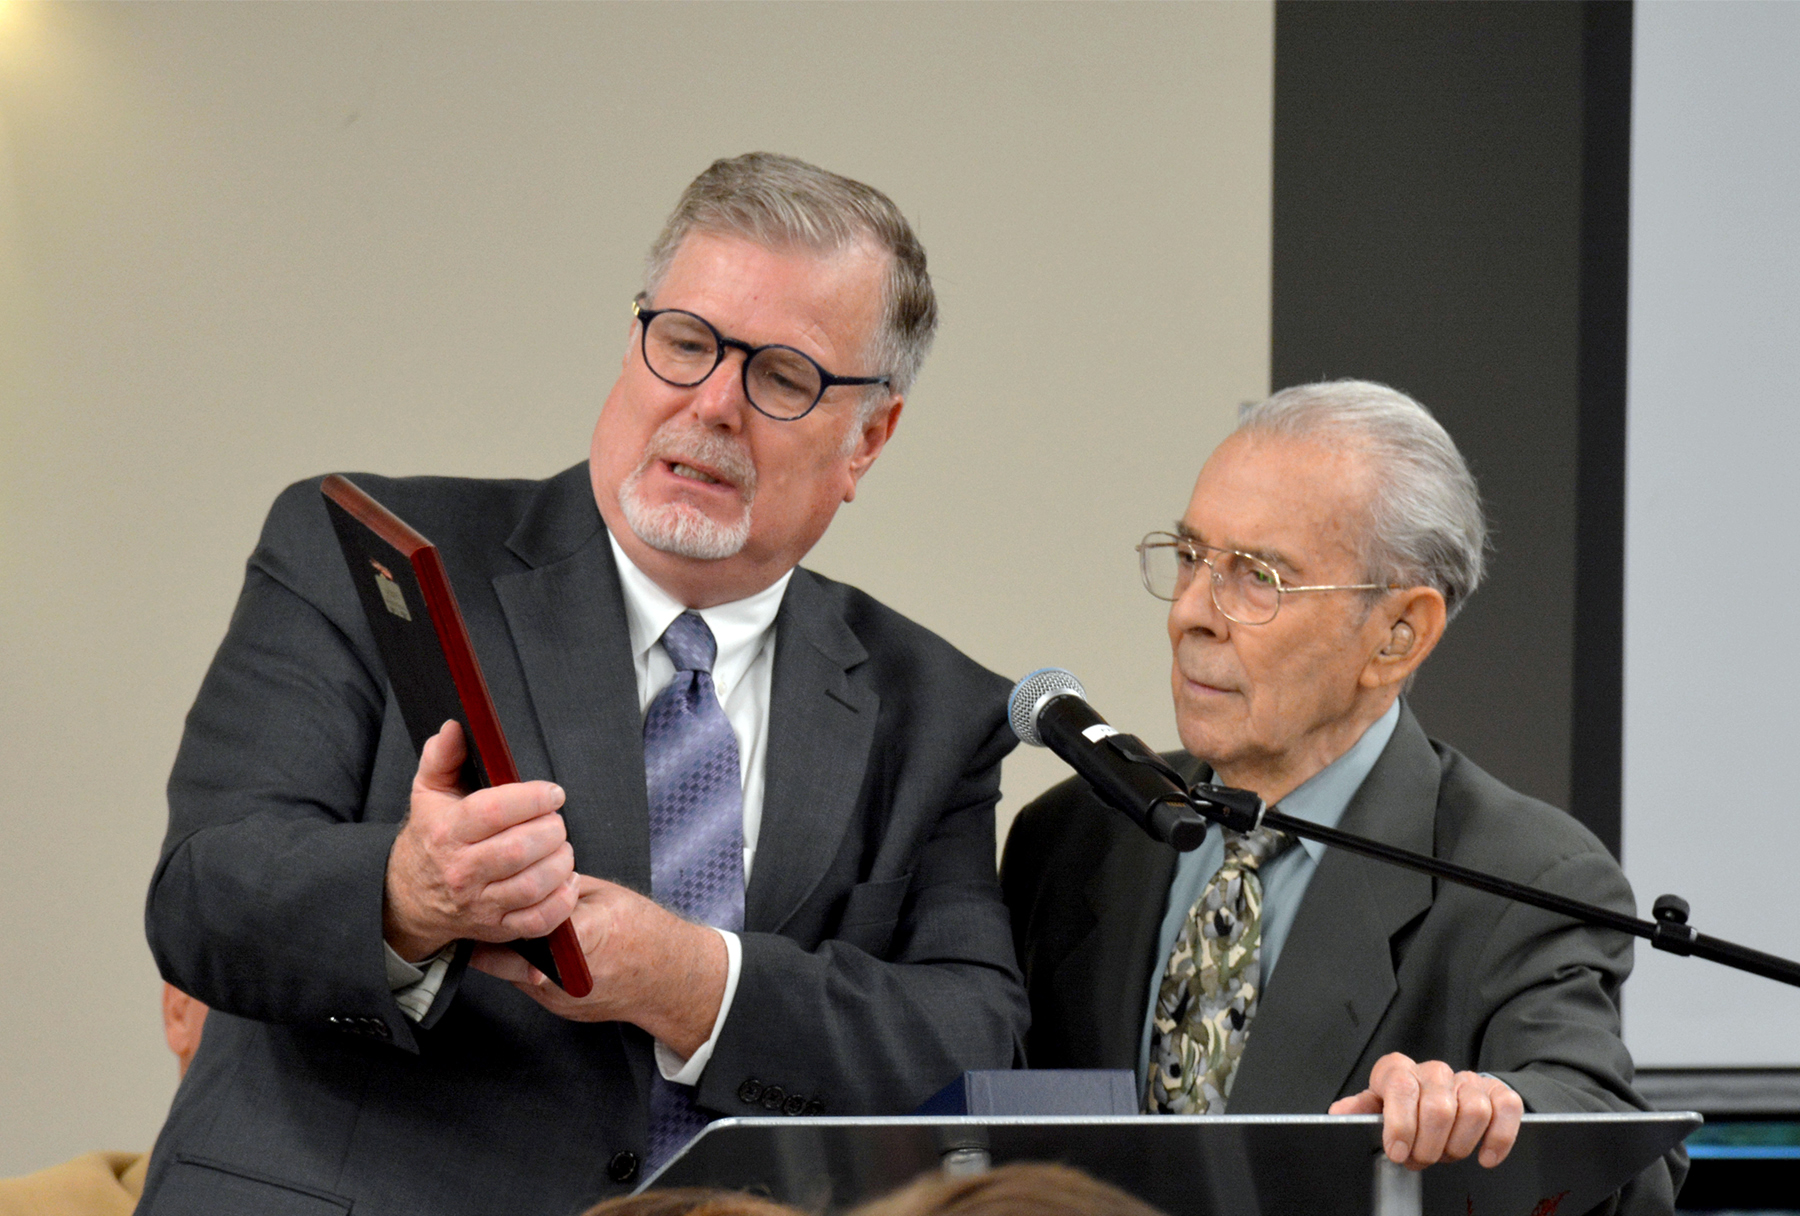 Dale Galusha, president of Pacific Press, reads a commemorative plaque given to Paul Damazo, founder and executive director of the Literature Ministry, for bringing the new Literature Ministry Distribution and Training Center from dream to fulfillment. 